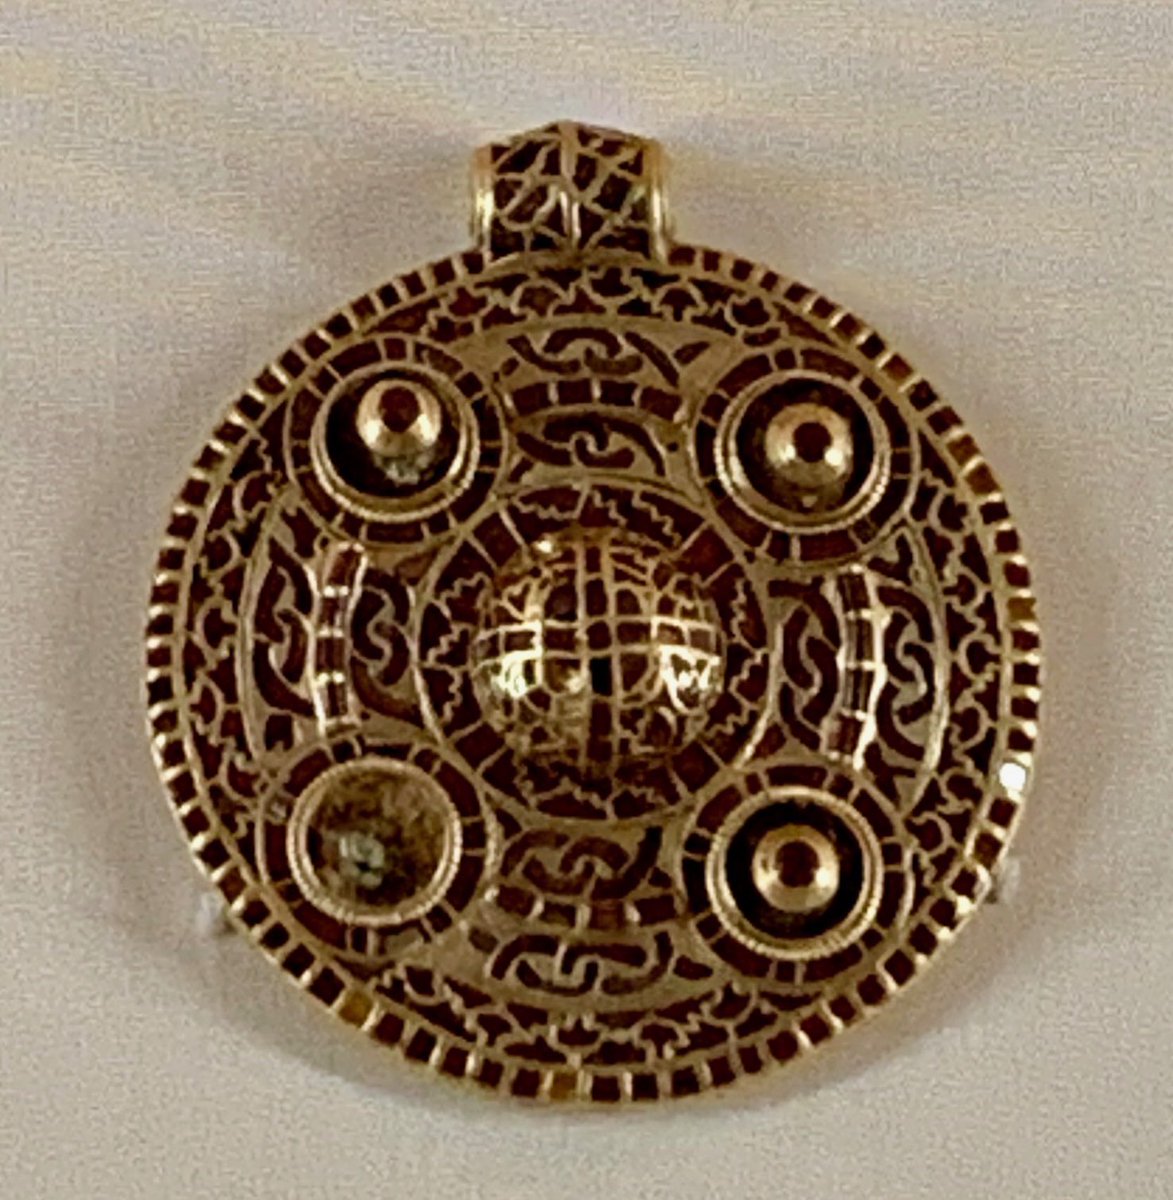 The Winfarthing Pendant - a gold composite Anglo-Saxon pendant which was discovered within a 7th century grave by a metal detectorist in December 2015 at Winfarthing, near Diss in Norfolk. Now part of the collections @NorwichCastle #FindsFriday 📸 My own